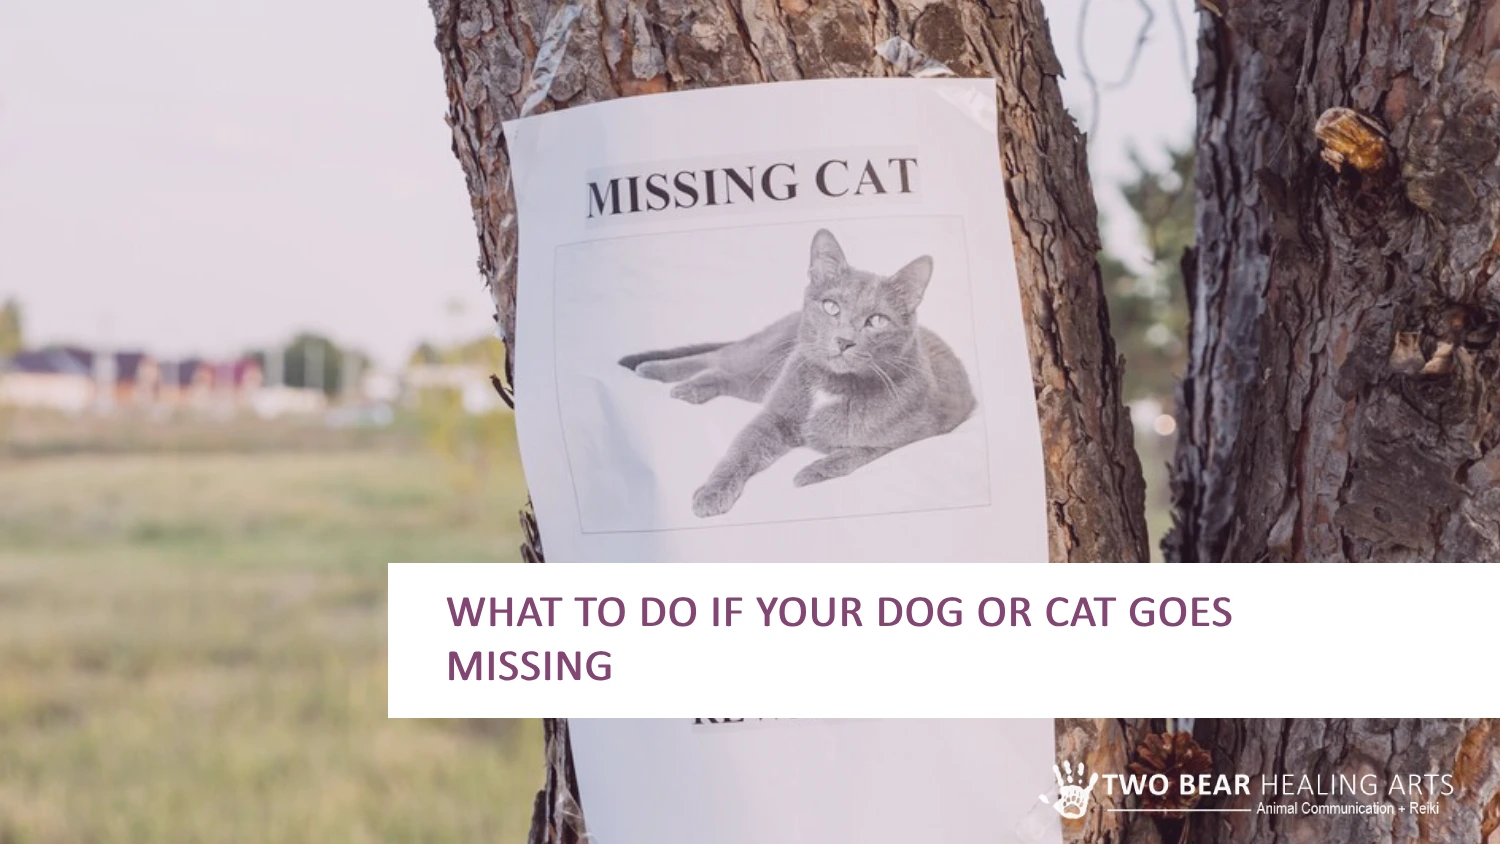 "MISSING CAT WHAT TO DO IF YOUR DOG OR CAT GOES MISSING" from "TWO BEAR HEALING ARTS" offering services like Animal Communication and Reiki. The background contains outdoor elements like trees and grass.